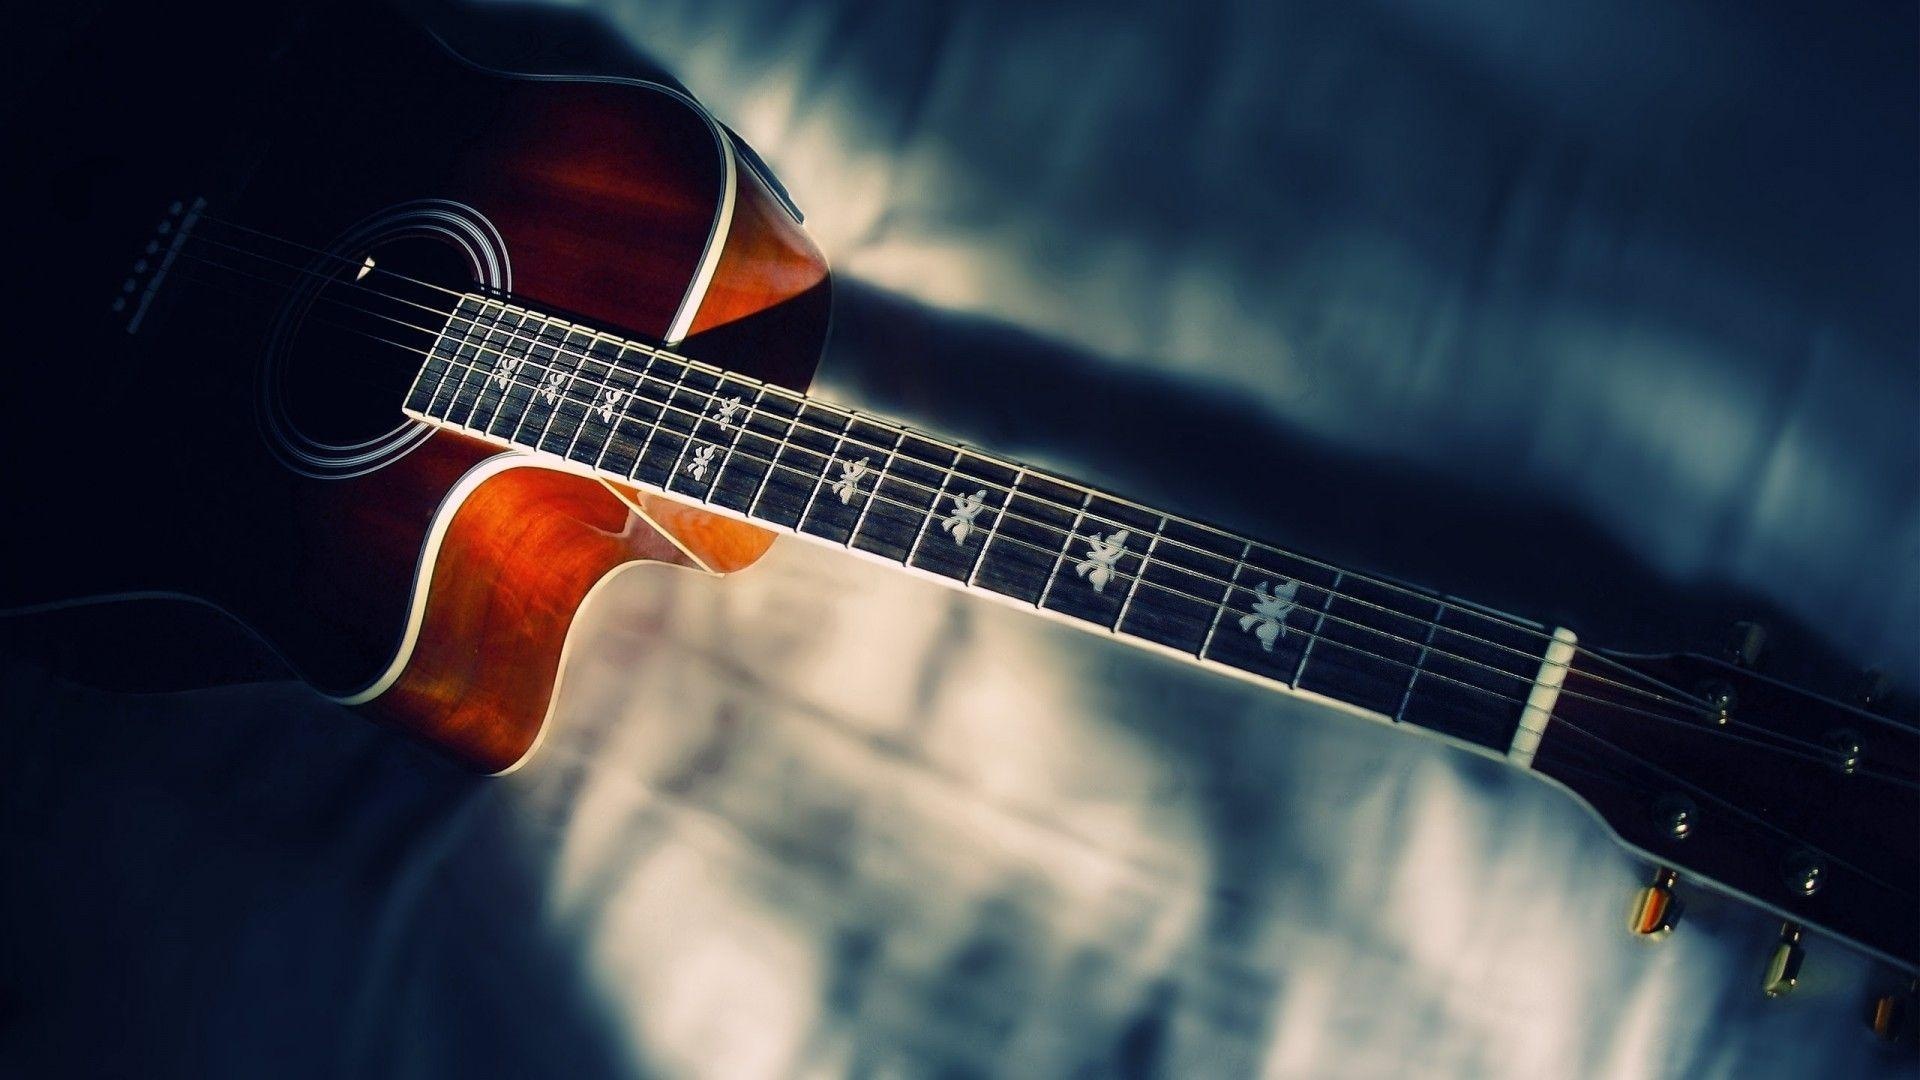 Guitar: Acoustic guitar, A plucked stringed instrument originating in Spain. 1920x1080 Full HD Wallpaper.